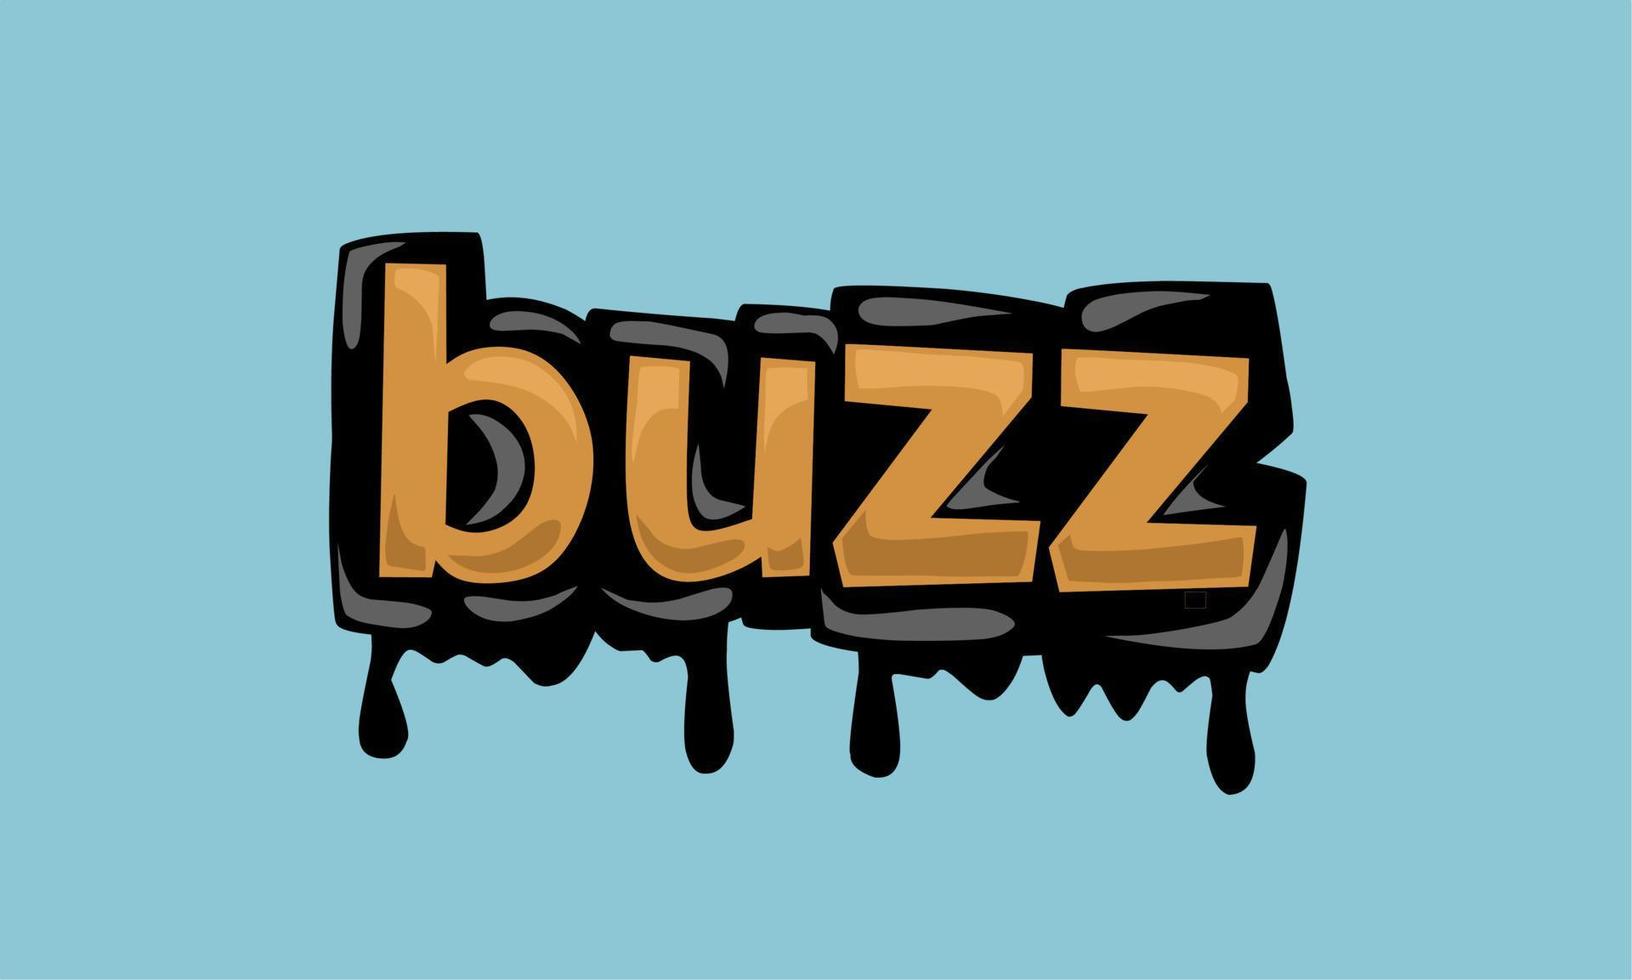 BUZZ writing vector design on blue background